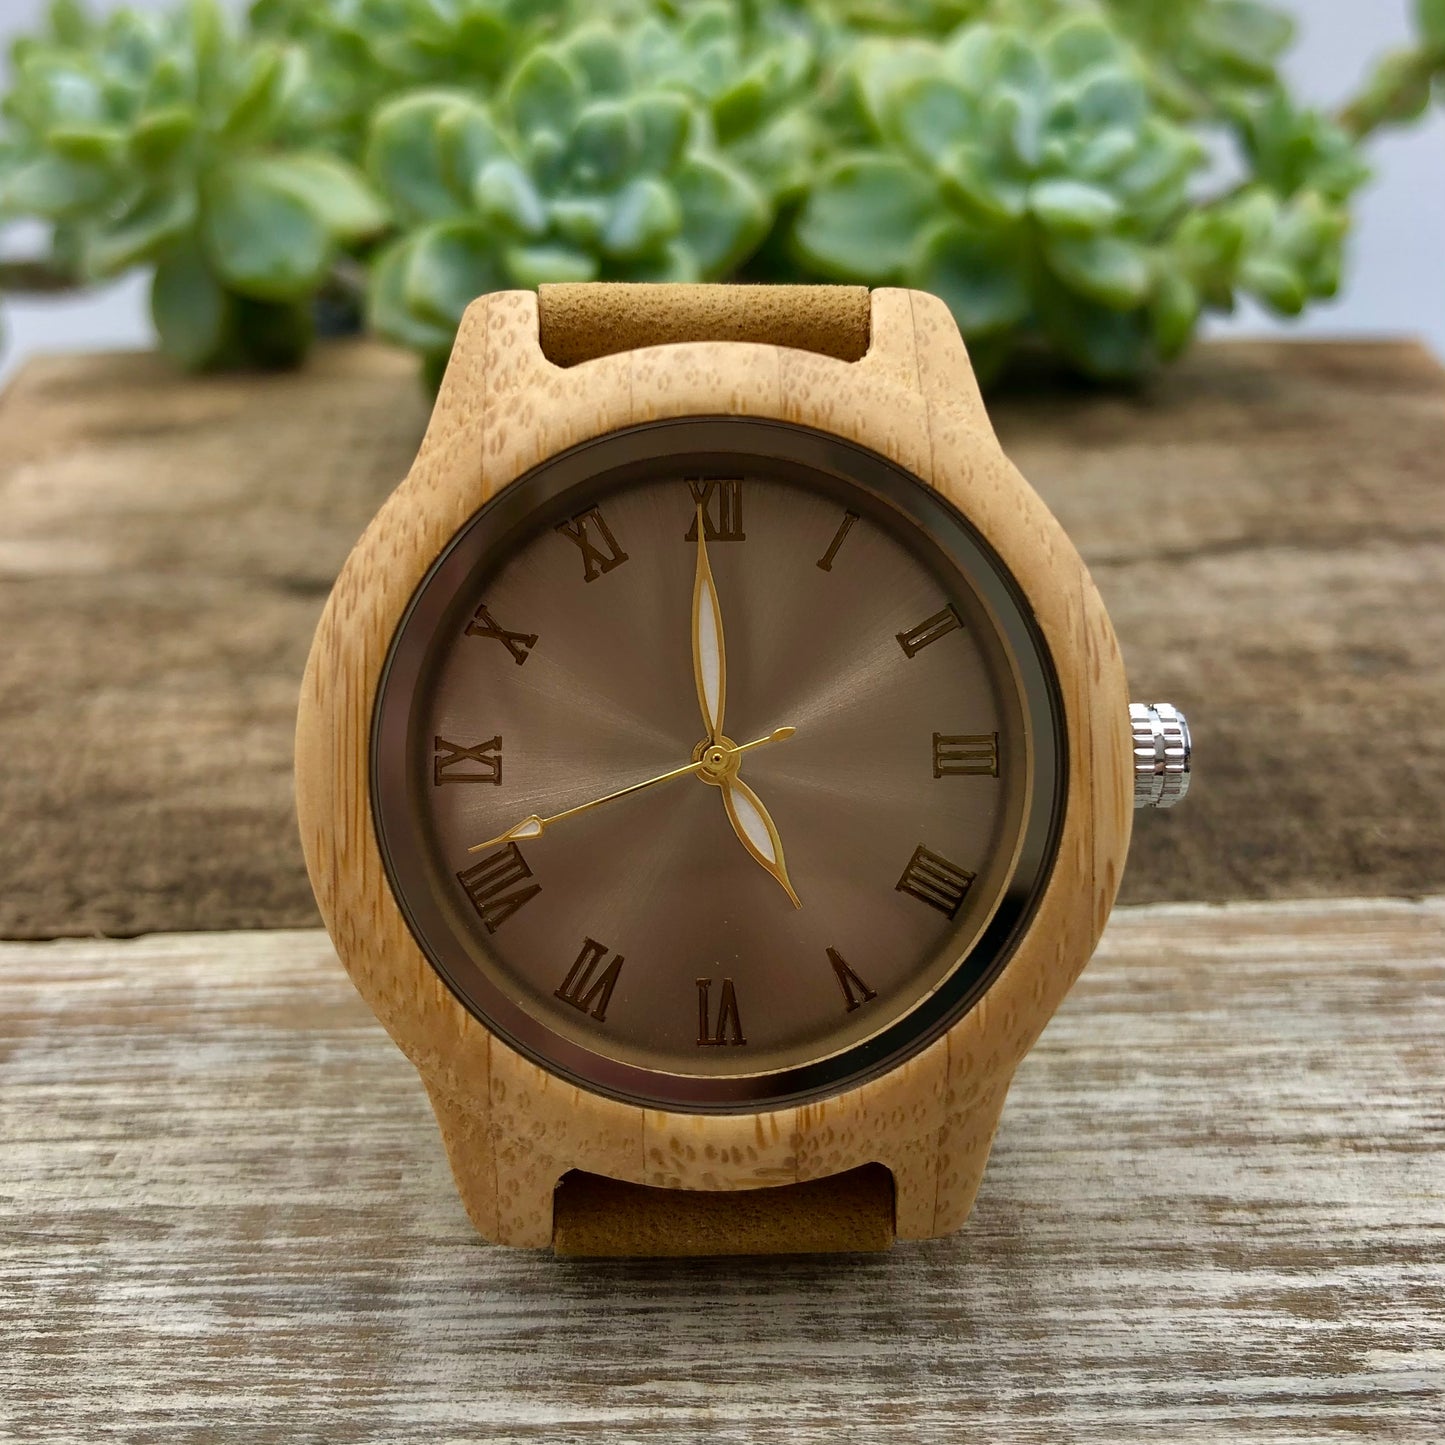 LADY PARIS Wooden Watch Bamboo with Tan Leather Strap - Hashtag Bamboo